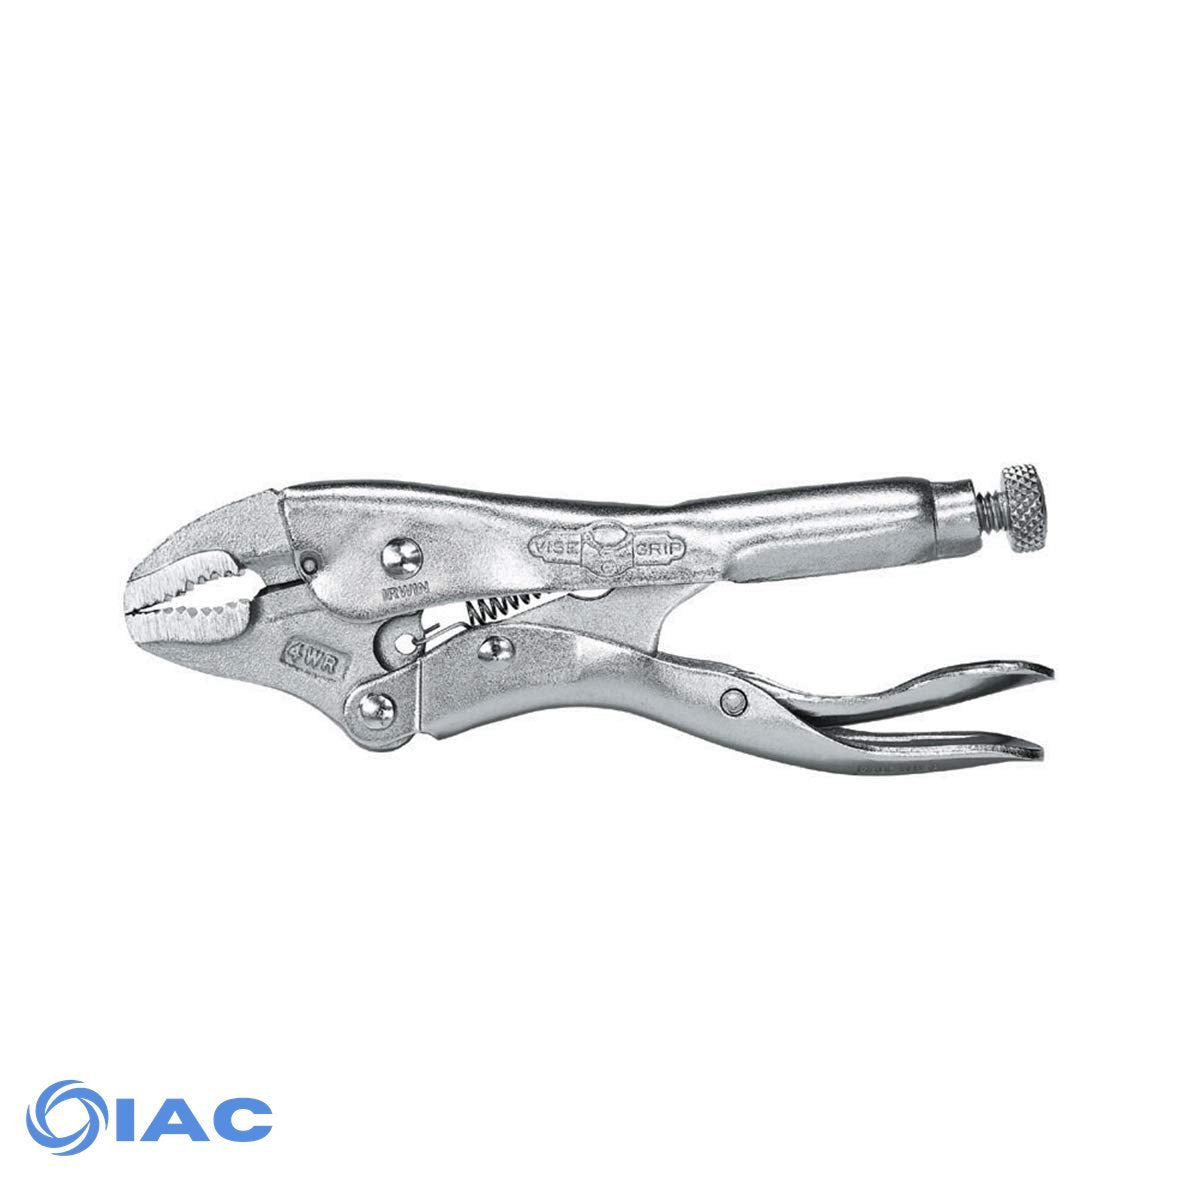 Vise-Grip 4WR 4in Curved Jaw Locking Pliers CODE: VIS4WRC